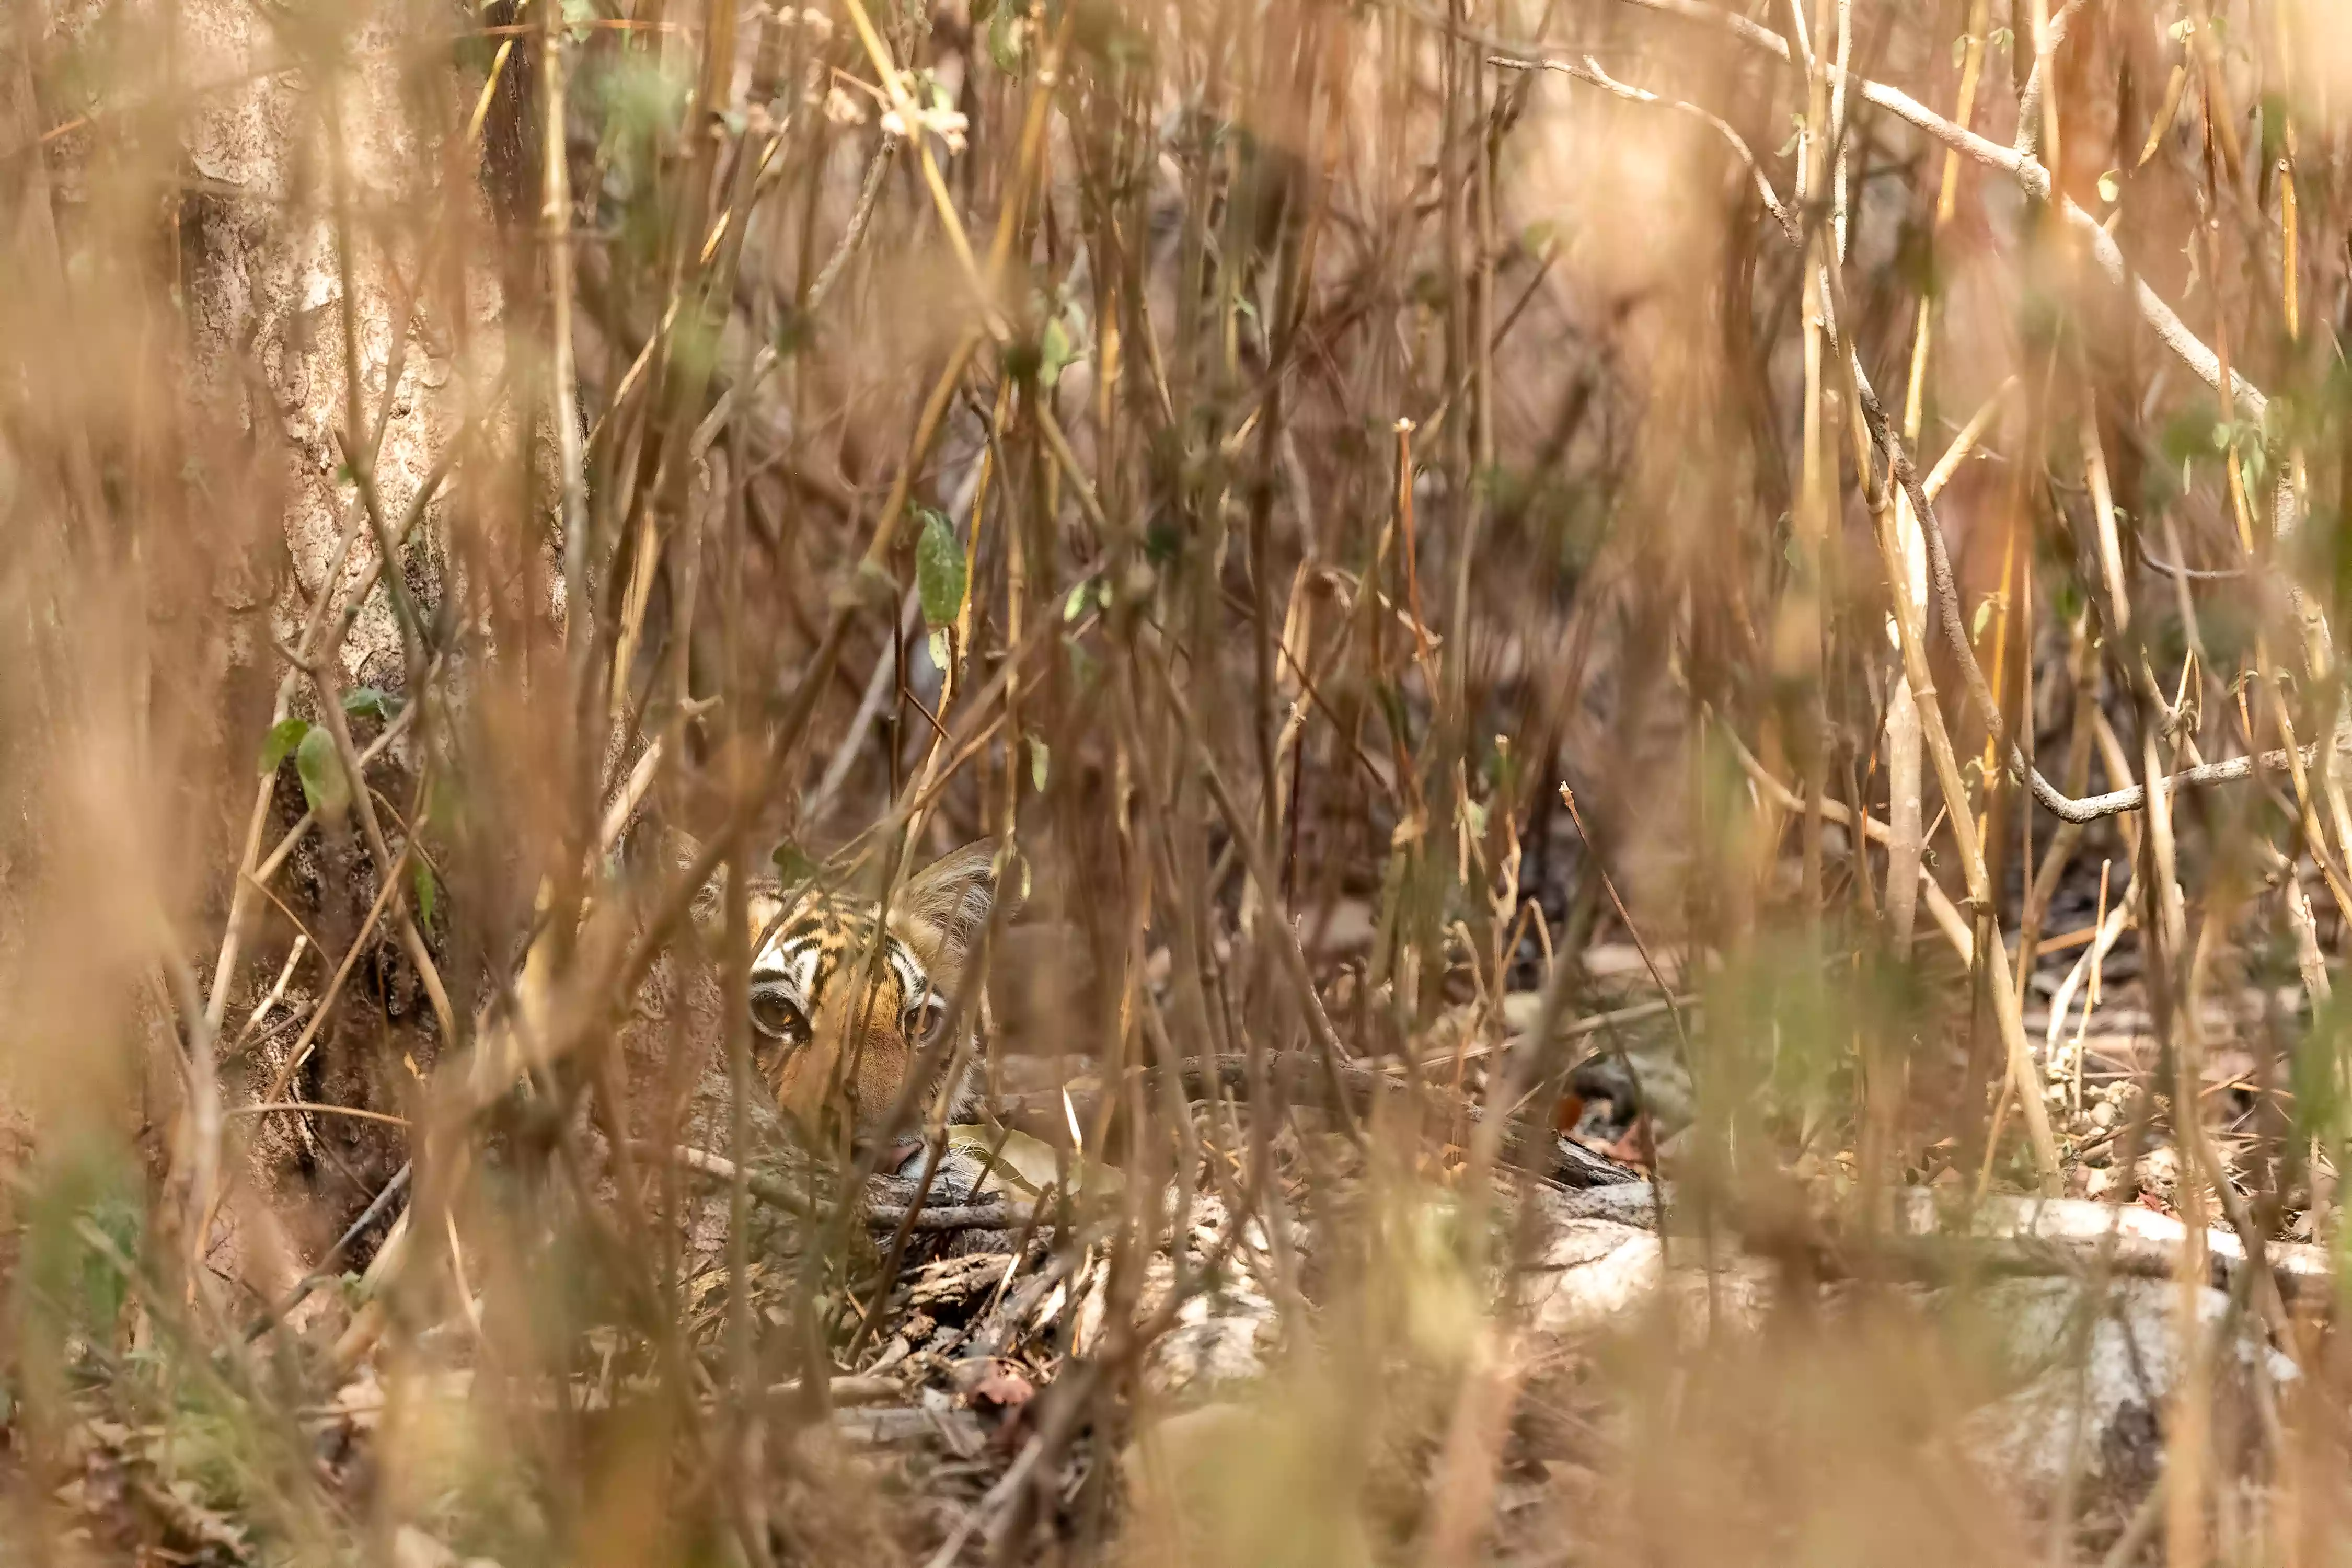 Tiger hidden in a bush. Only a small portion of the face is visible behind the stems of tropical scrub